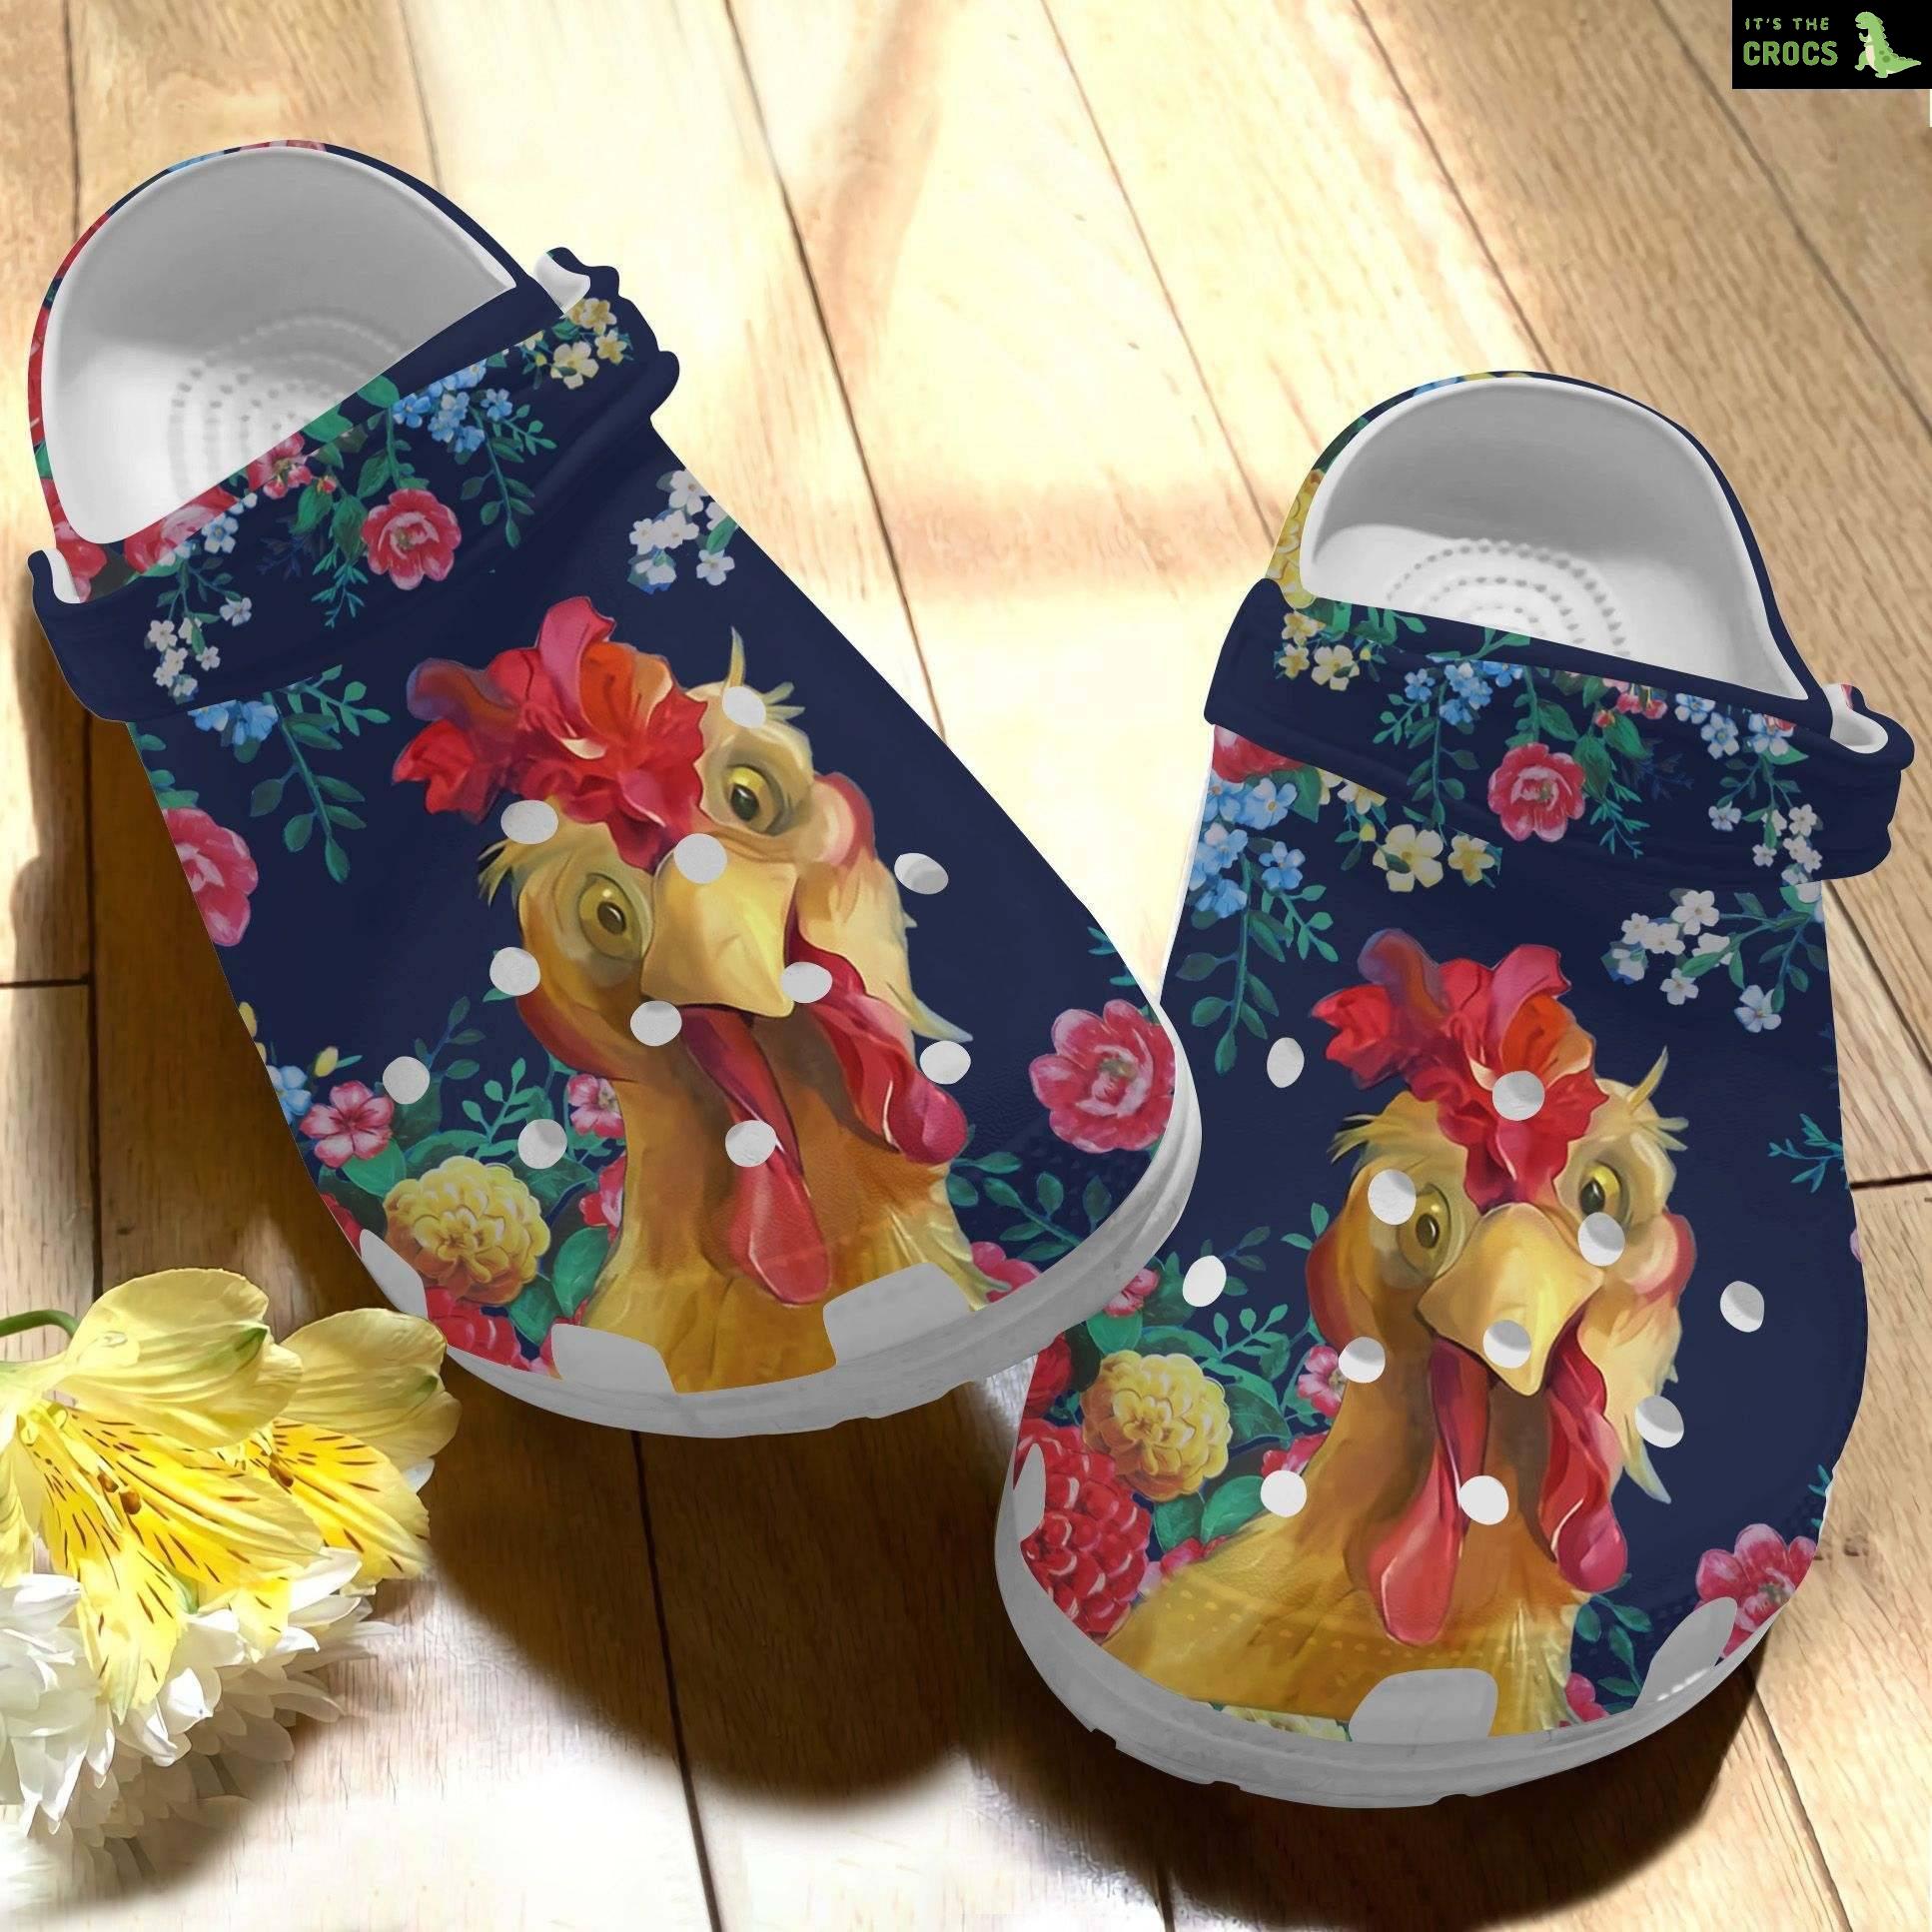 Chicken Clog Floral Vintage Gift For Mother Day – Chicken Collection Crocs Shoes Crocbland Clog Gifts For Mom Daughter